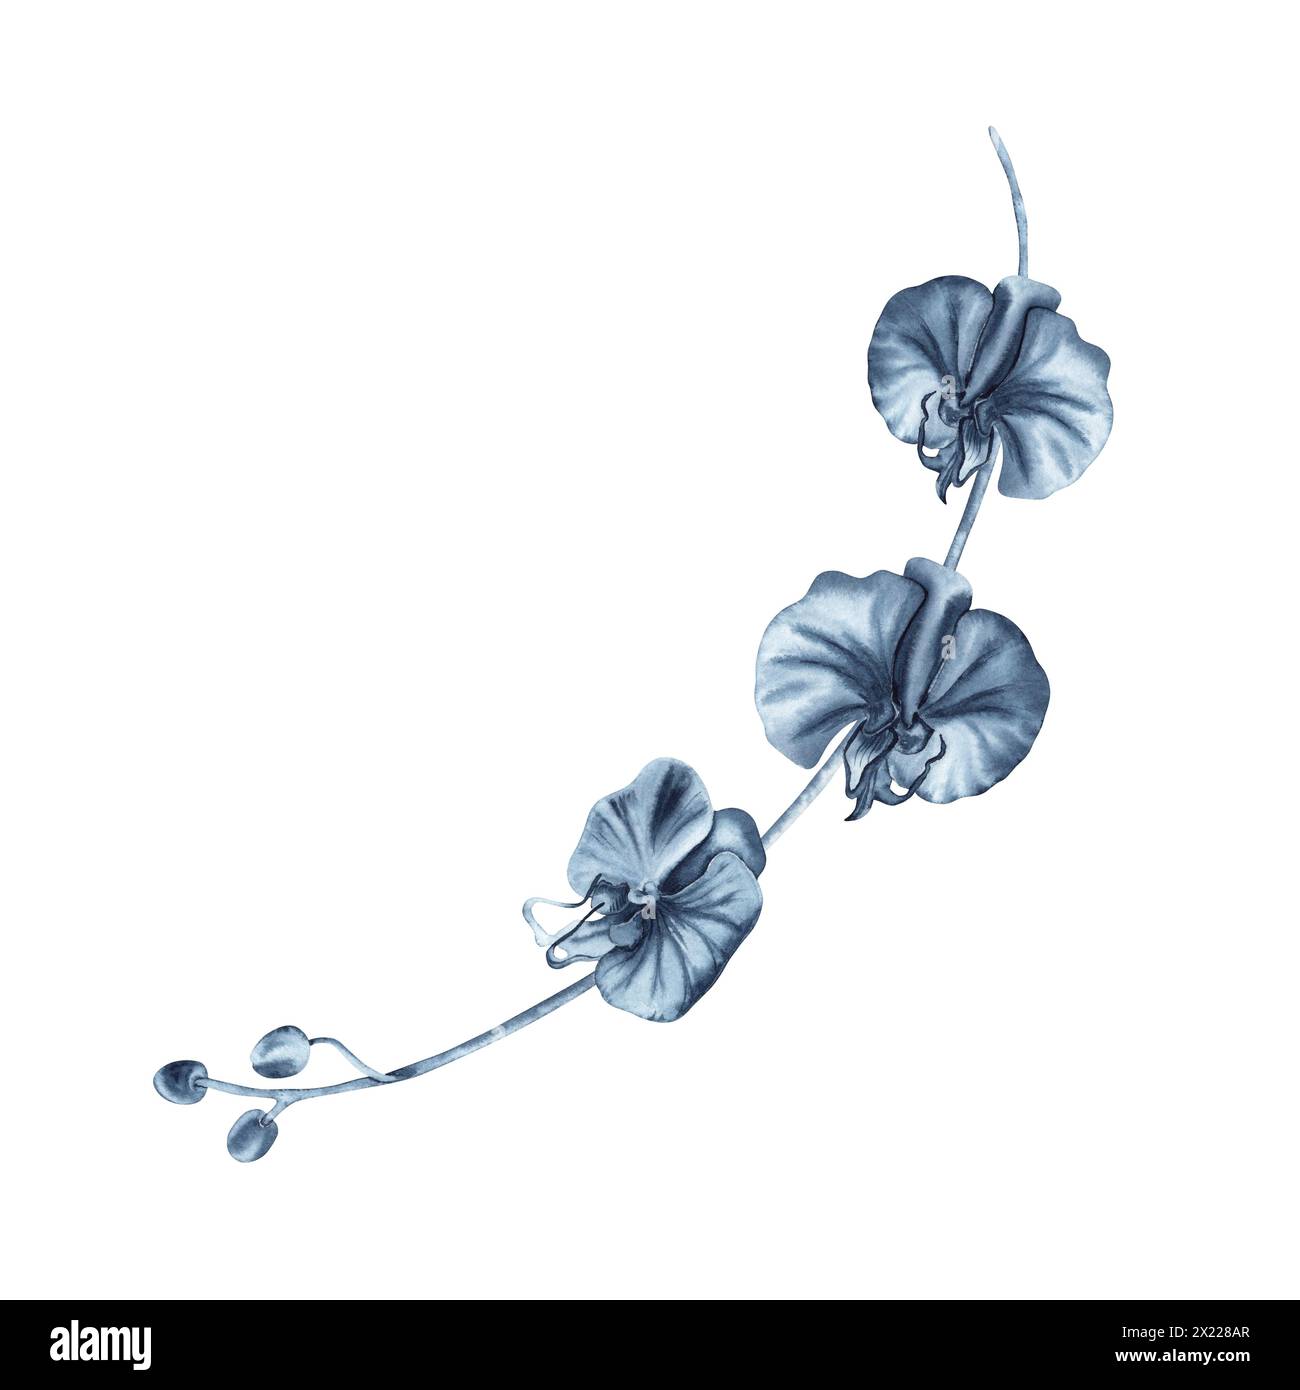 Blue orchid flowers branch with buds. Watercolor hand drawn illustration isolated on white background. Indigo monochrome floral painting for fashion Stock Photo